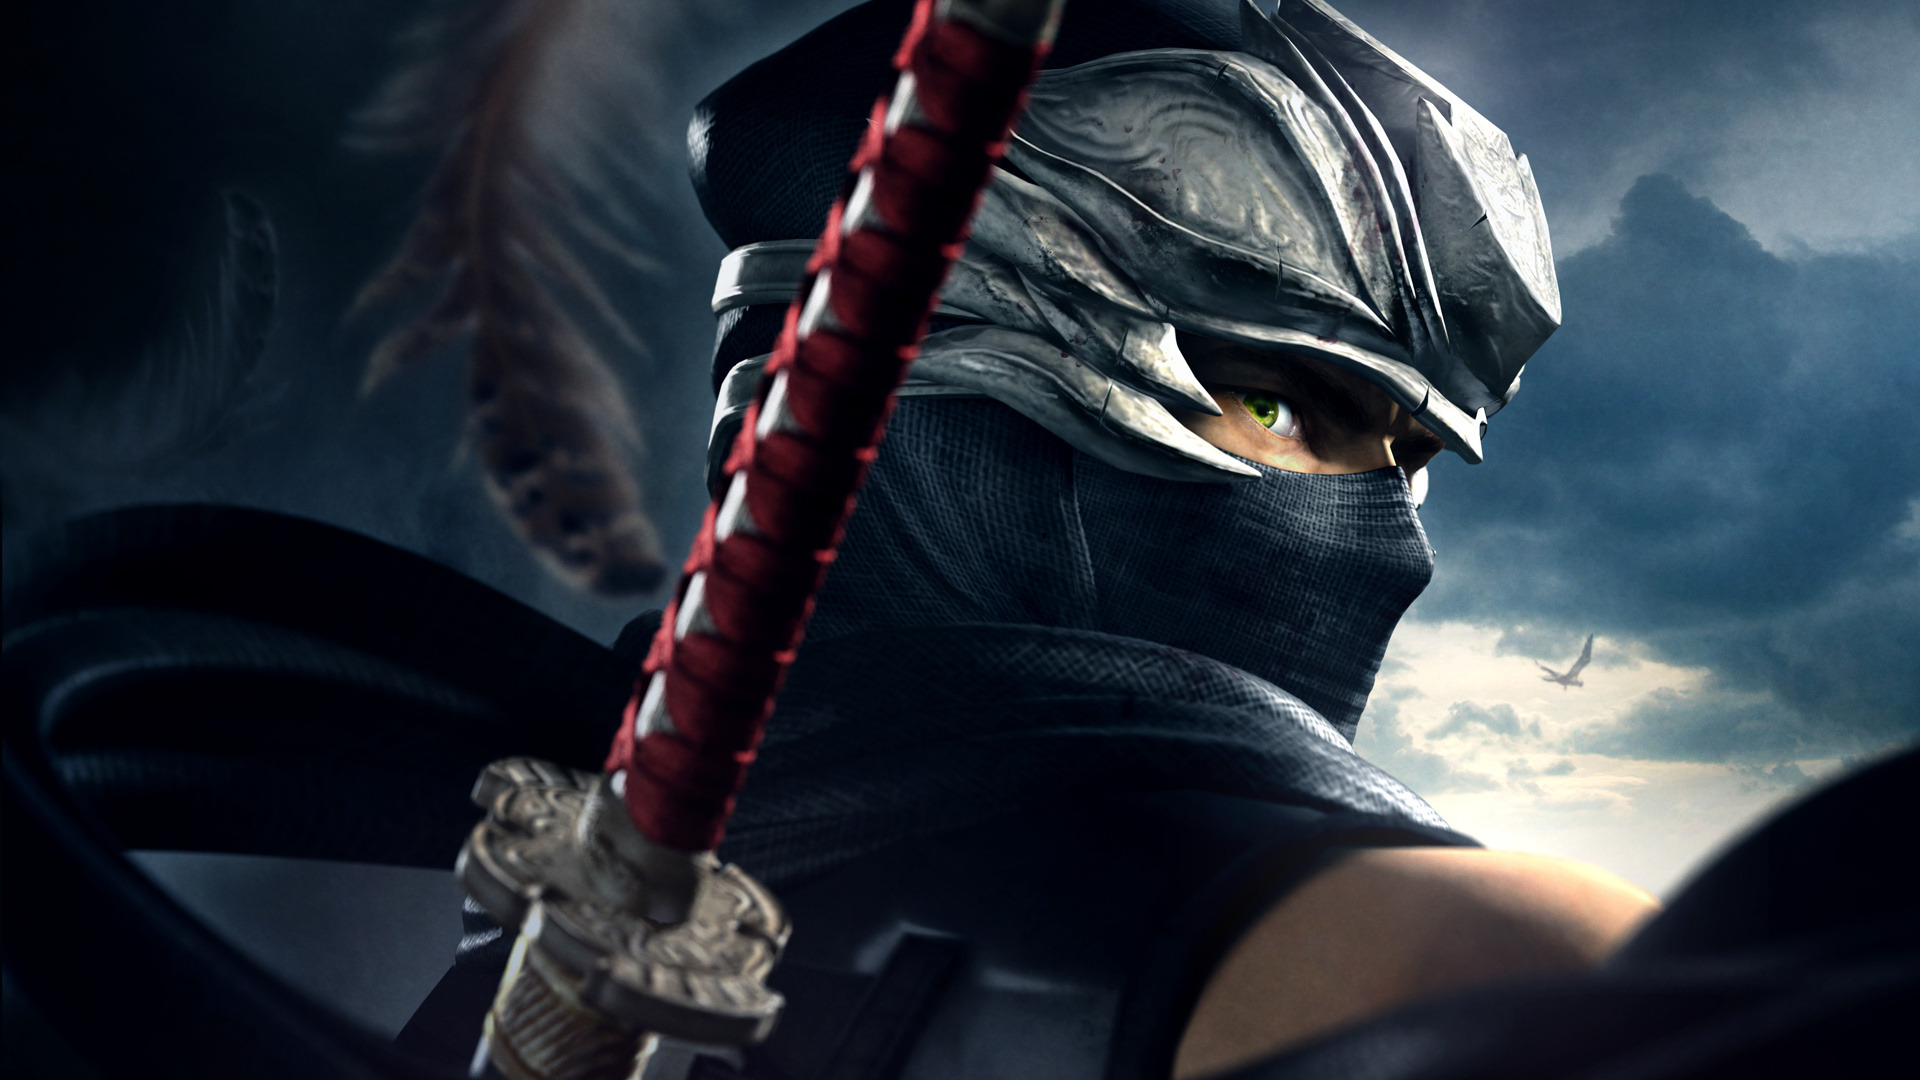 ninja-gaiden-sigma-trilogy-listed-for-ps4-by-hong-kong-publisher-push-square